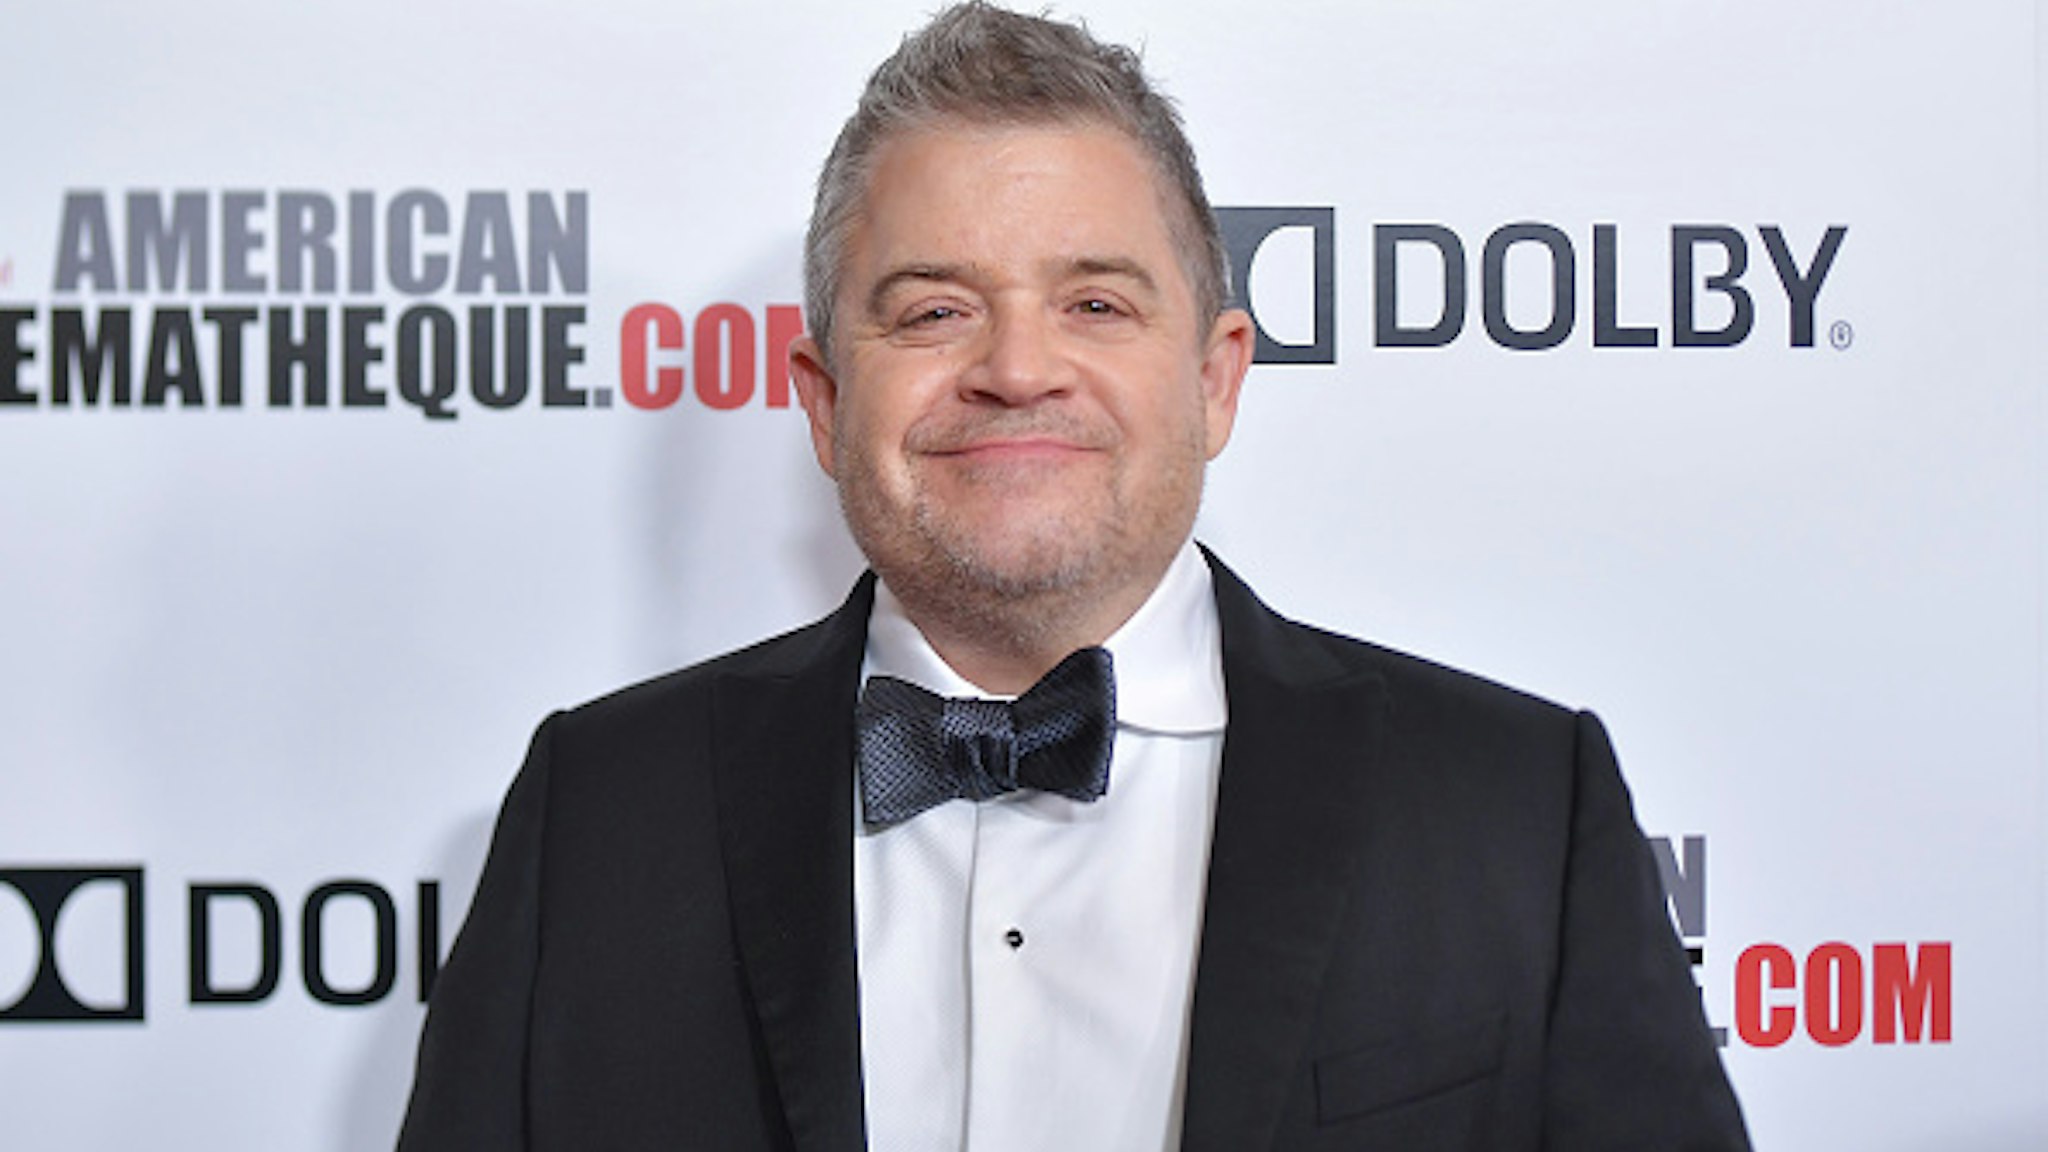 BEVERLY HILLS, CALIFORNIA - NOVEMBER 08: (Editors note: image taken with tilt shift lens) Patton Oswalt attends the 33rd American Cinematheque Award Presentation Honoring Charlize Theron at The Beverly Hilton Hotel on November 08, 2019 in Beverly Hills, California.